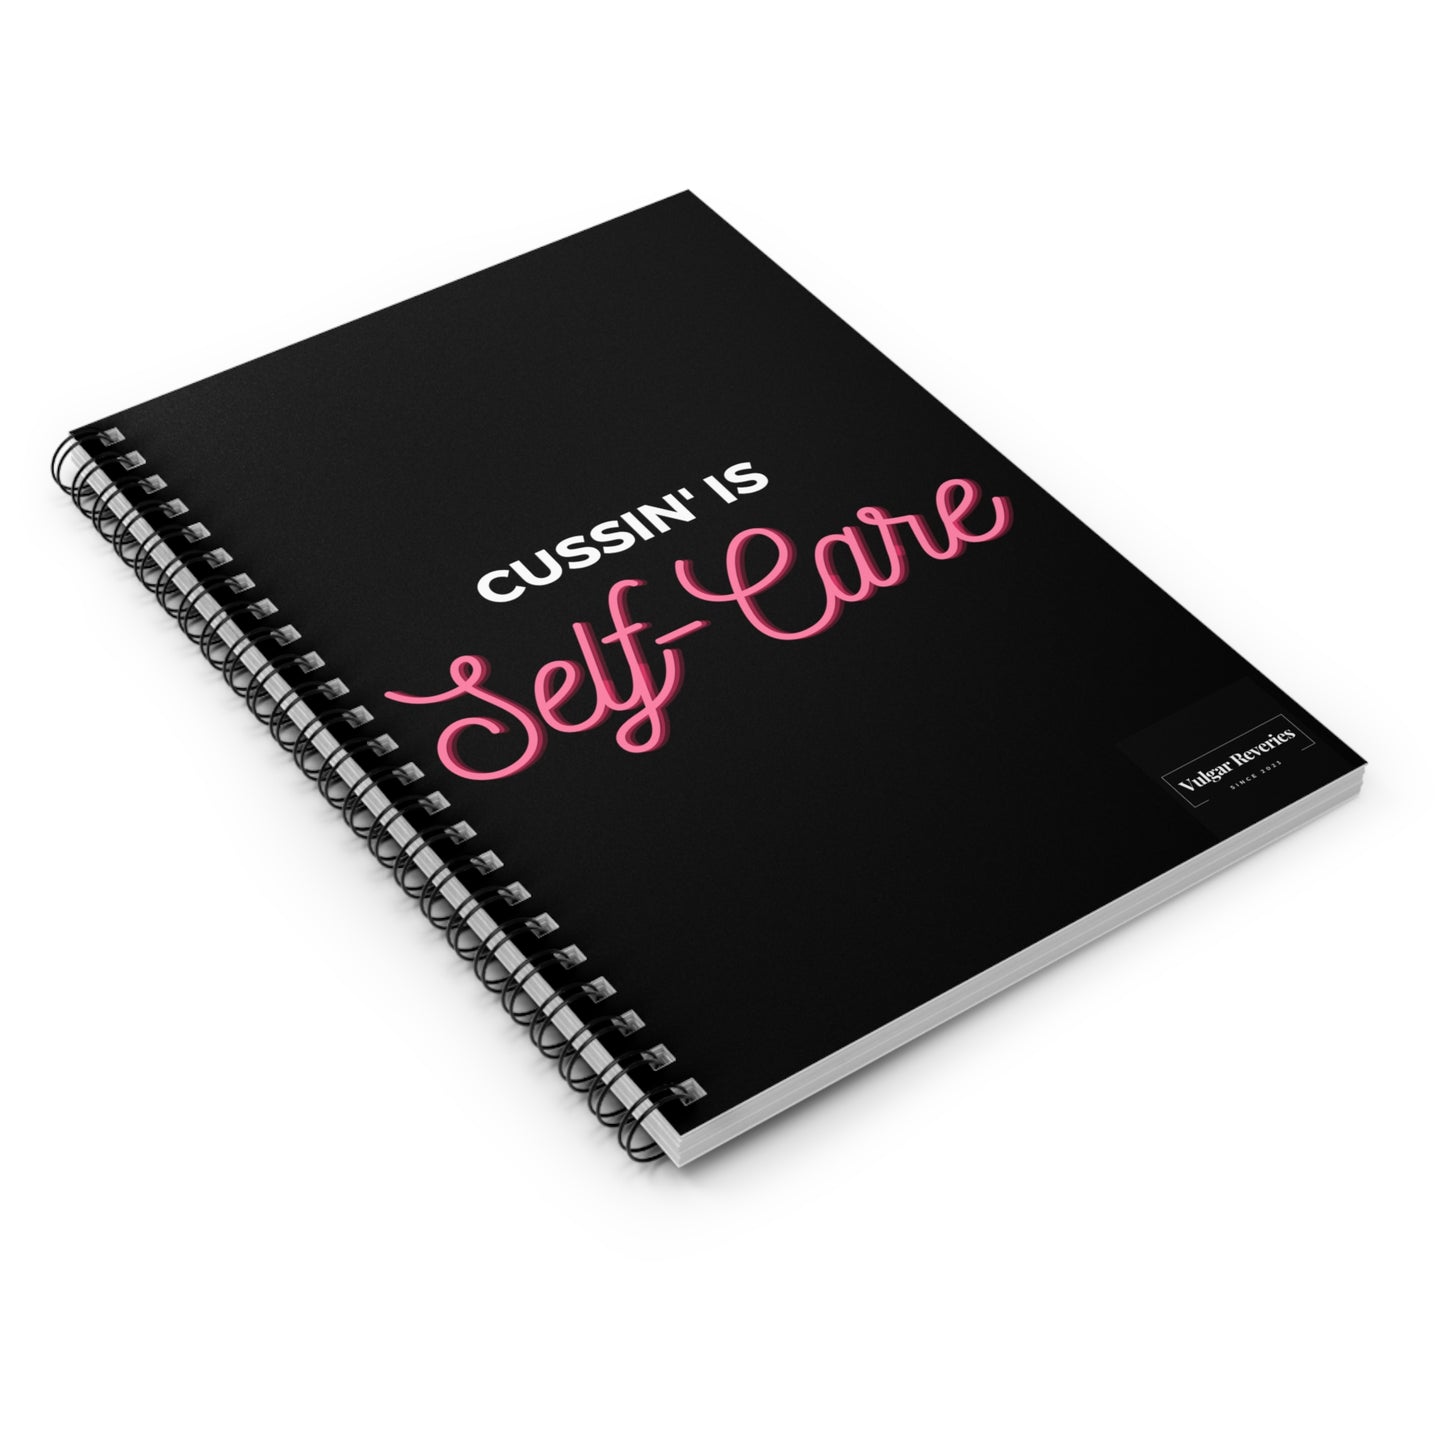 Cussin' is Self-Care - Spiral Notebook - Ruled Line